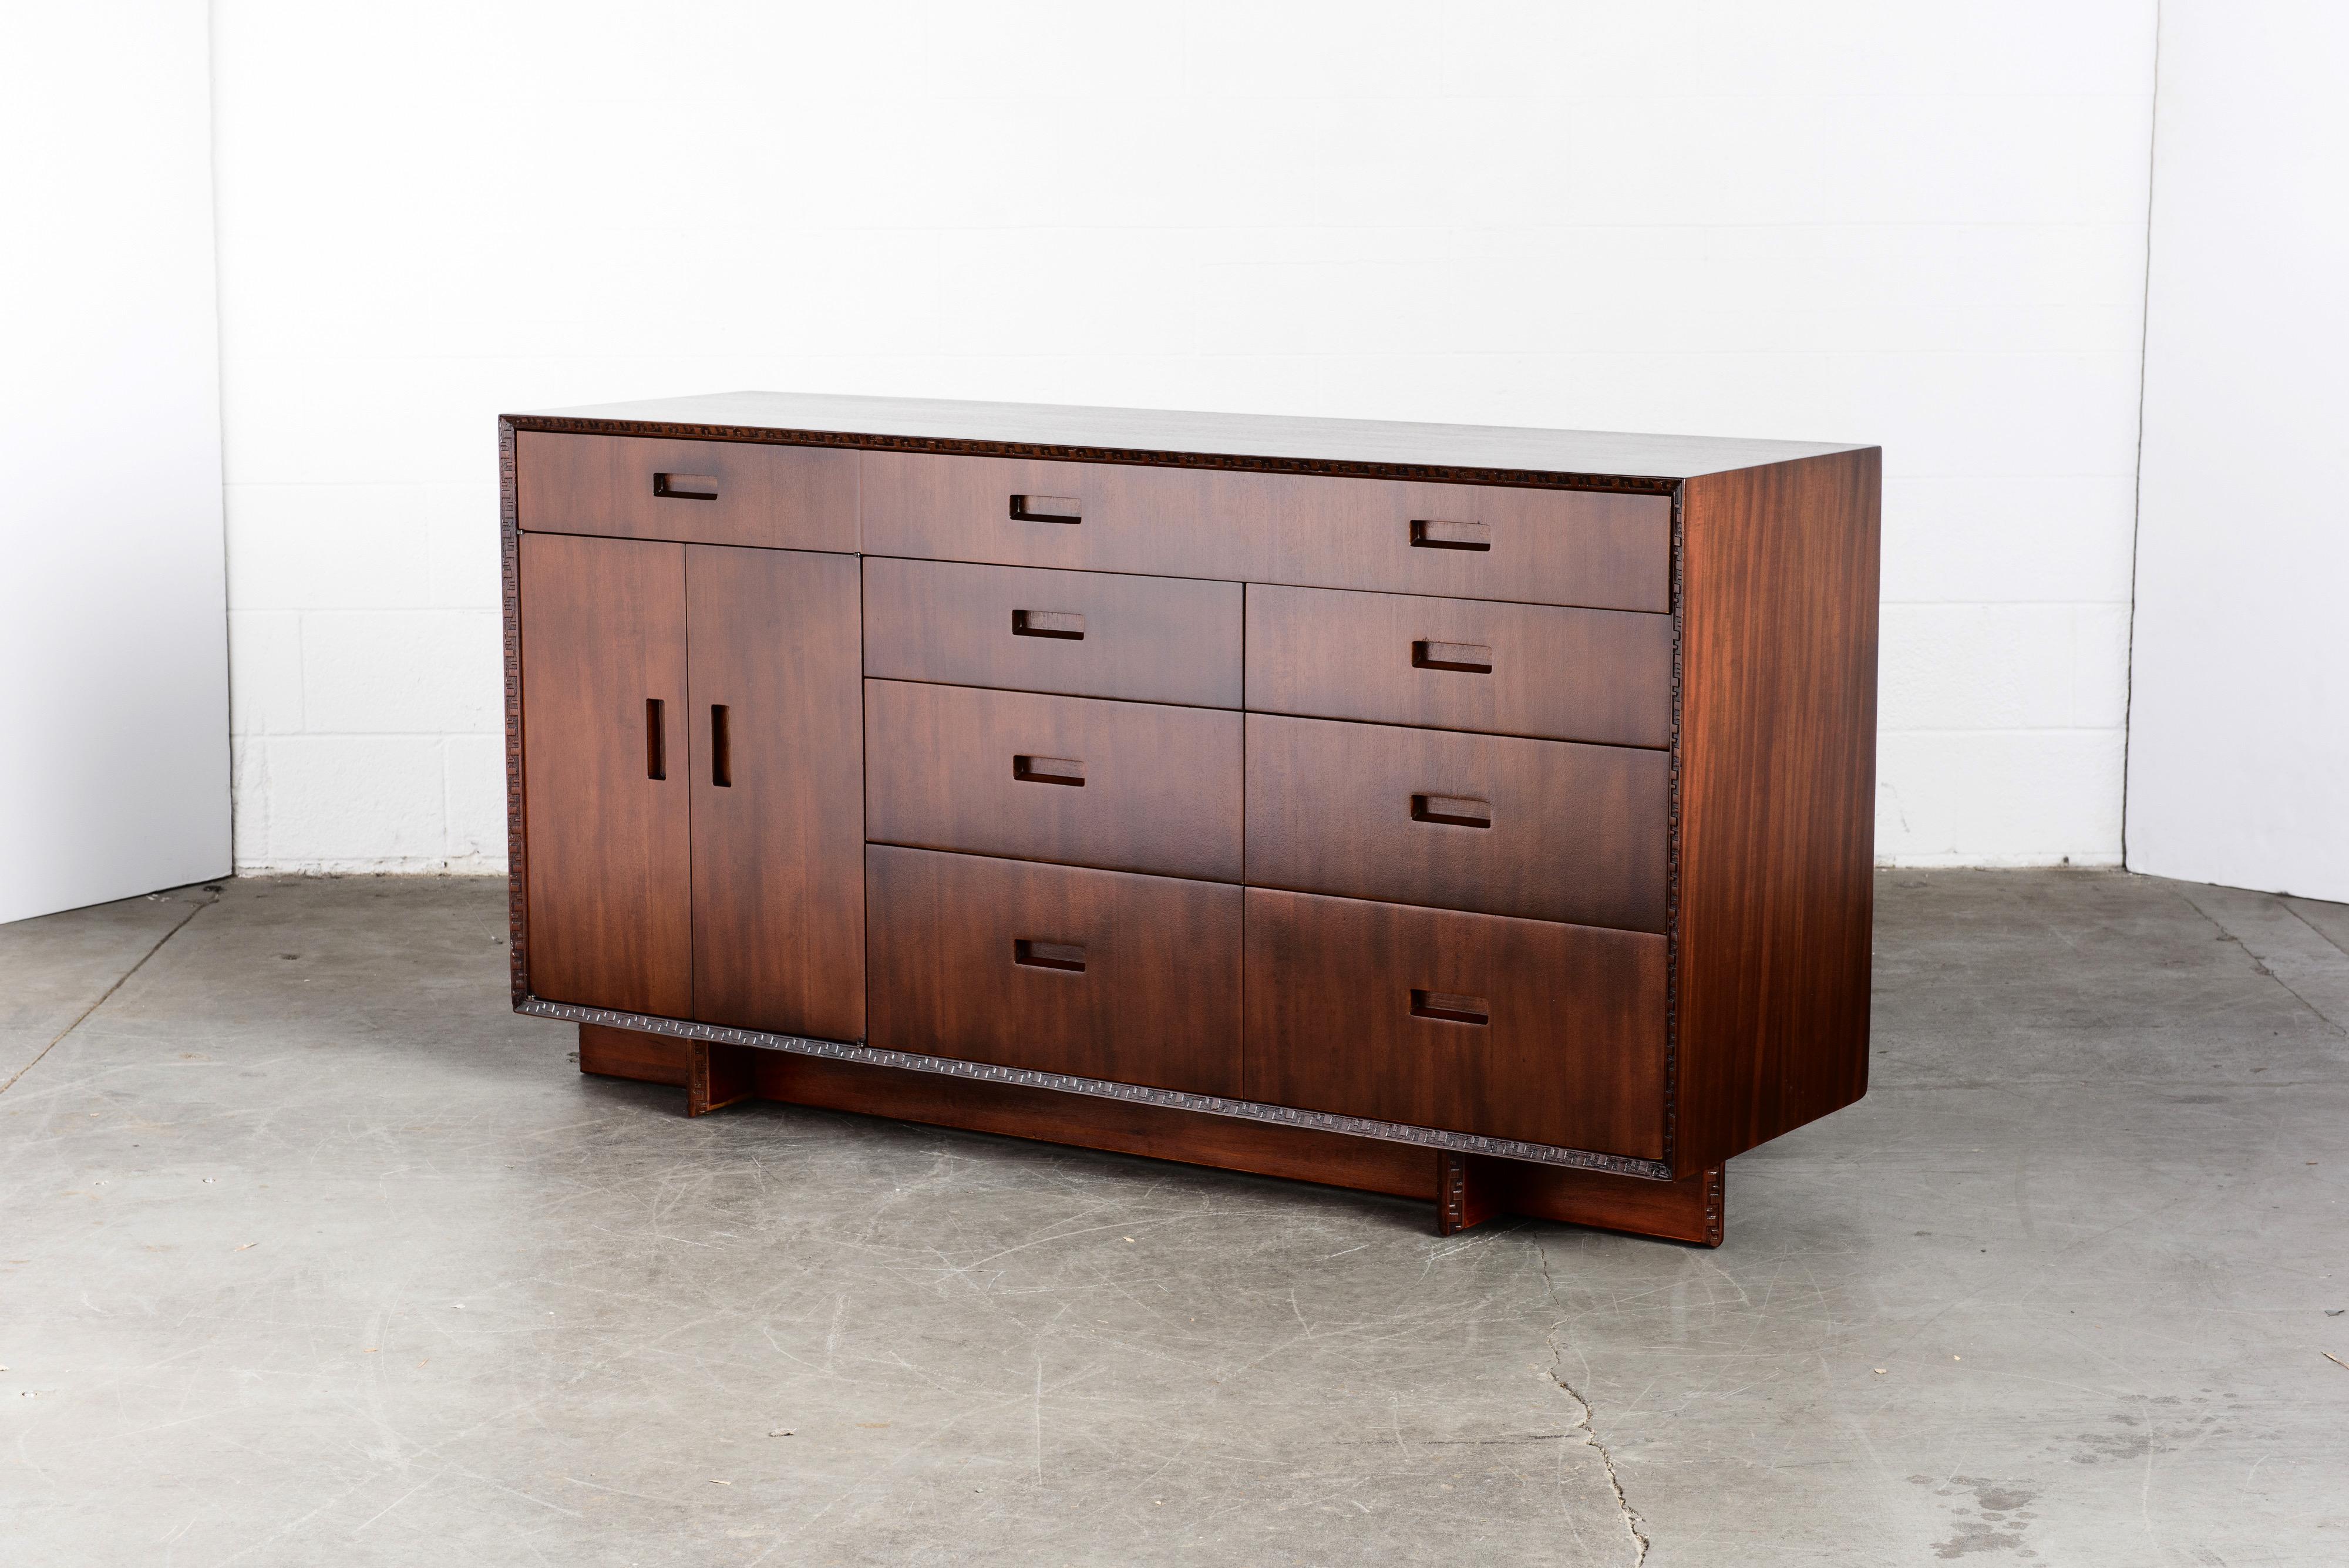 This gorgeously refinished Honduran Mahogany 'Taliesin' sideboard was designed by Frank Lloyd Wright for Heritage-Henredon in 1955 and produced only for two years, therefore is now a highly sought-after and rare collectors item. This example is